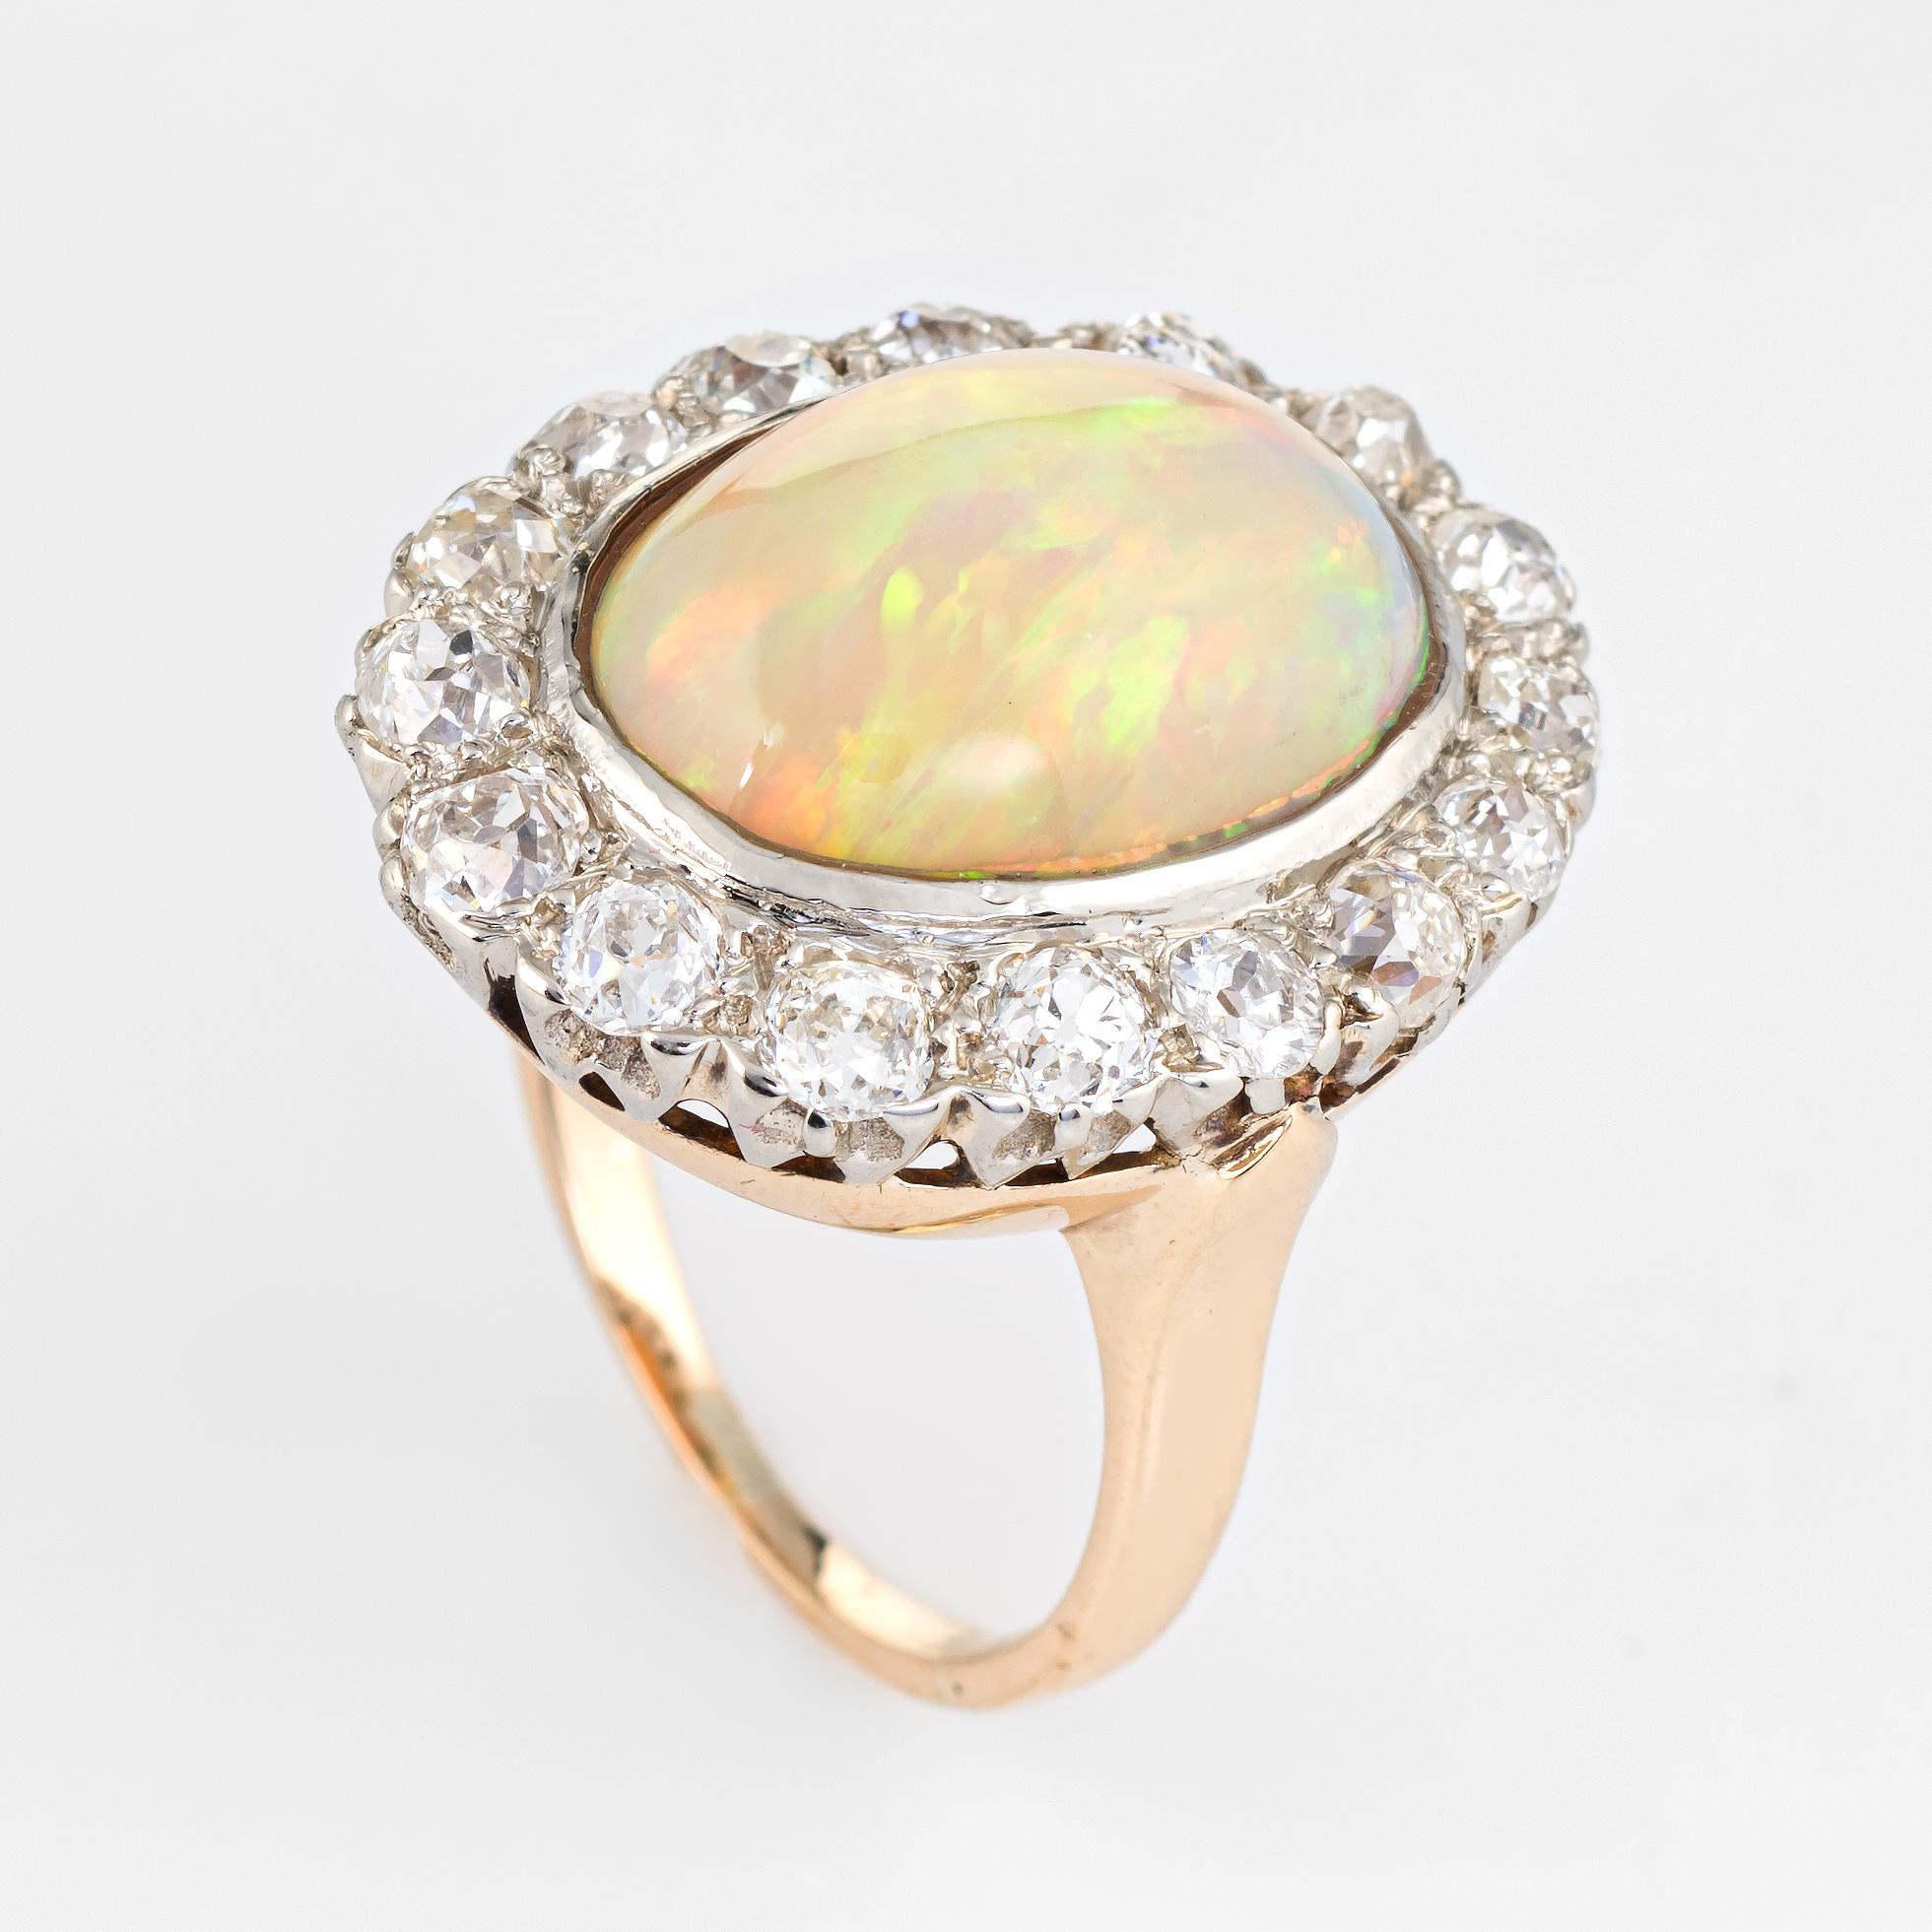 Striking vintage opal & diamond ring (circa 1920s to 1930s), crafted in 14 karat yellow gold. 

Centrally mounted natural opal measures 14mm x 11mm (estimated at 6 carats), accented with 16 estimated 0.10 carat old mine cut diamonds. The total